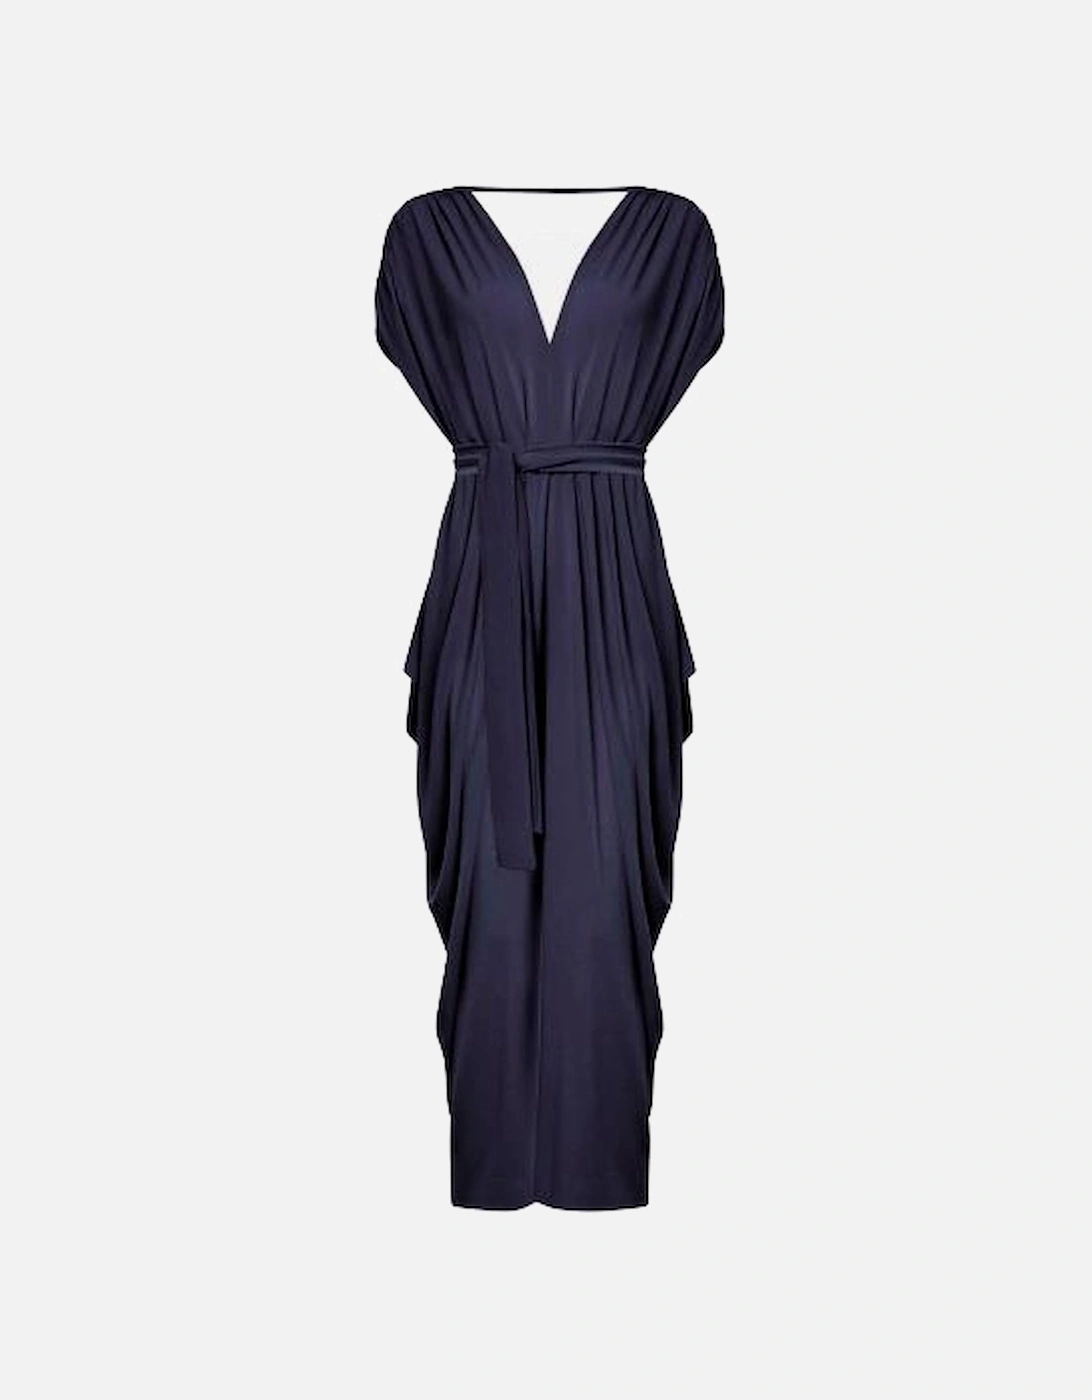 Batwing Pleated Maxi Dress Navy